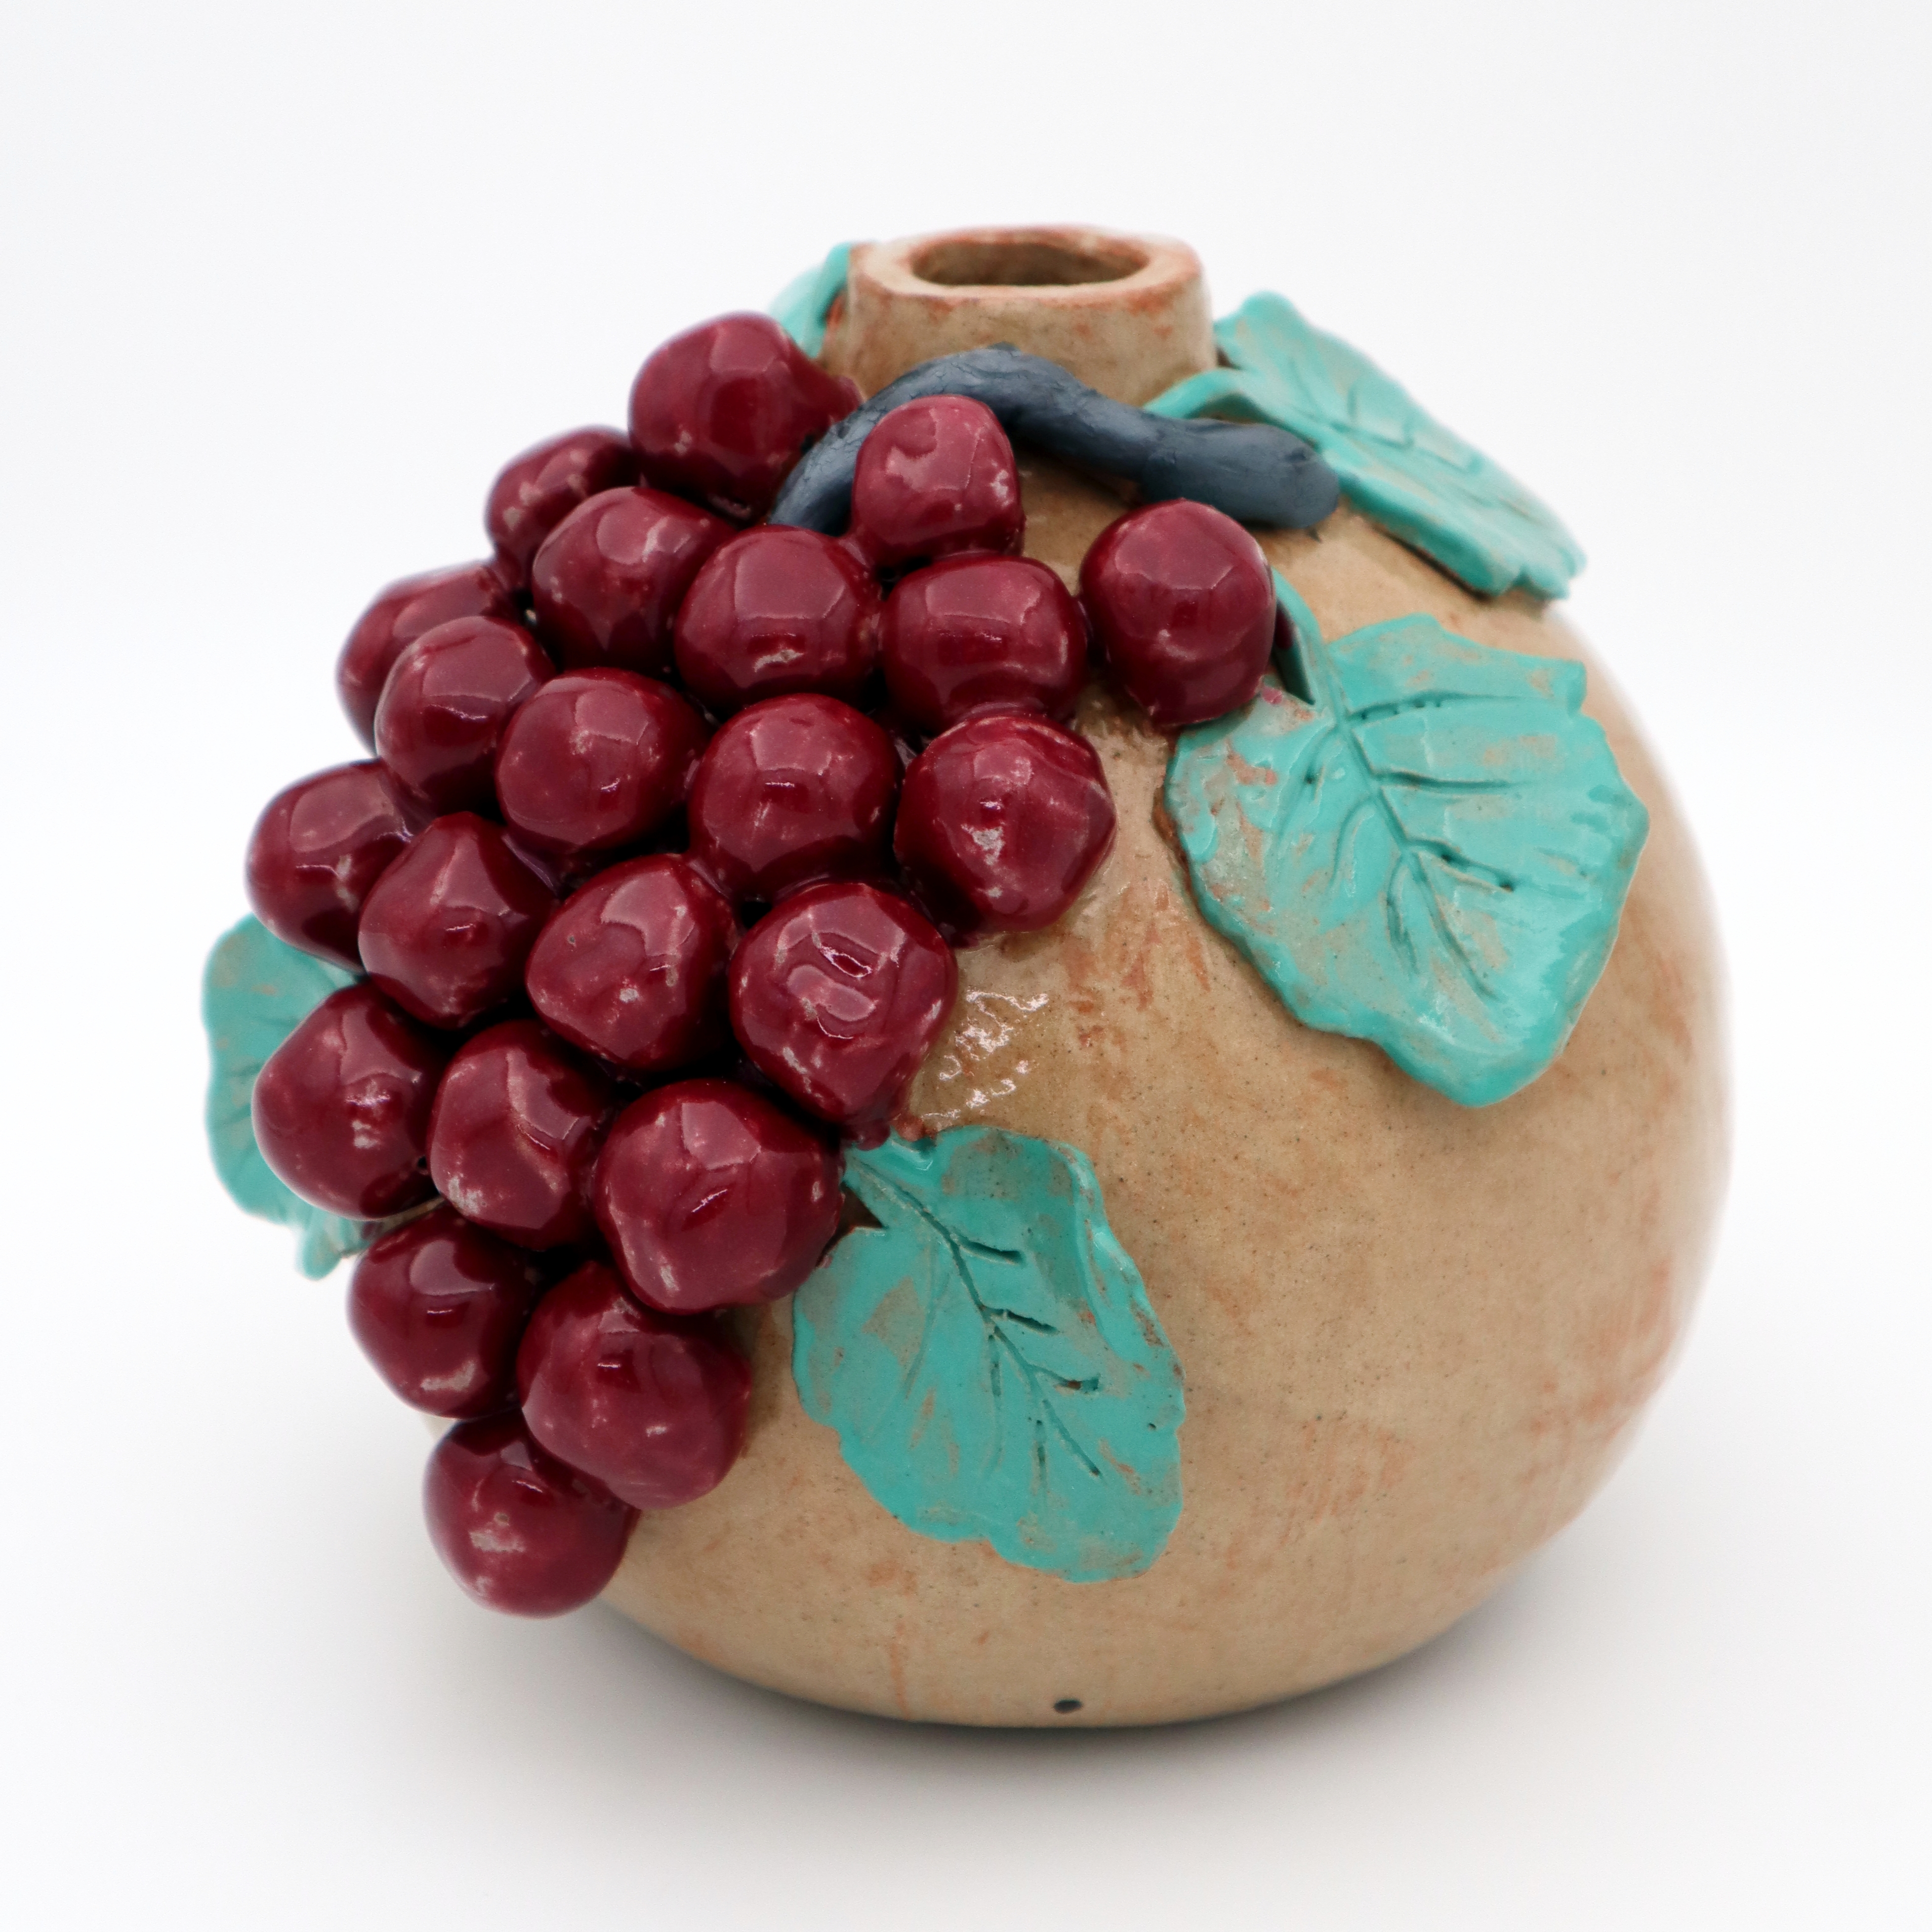 A round ceramic vase with three dimensional red grapes cascading down one side